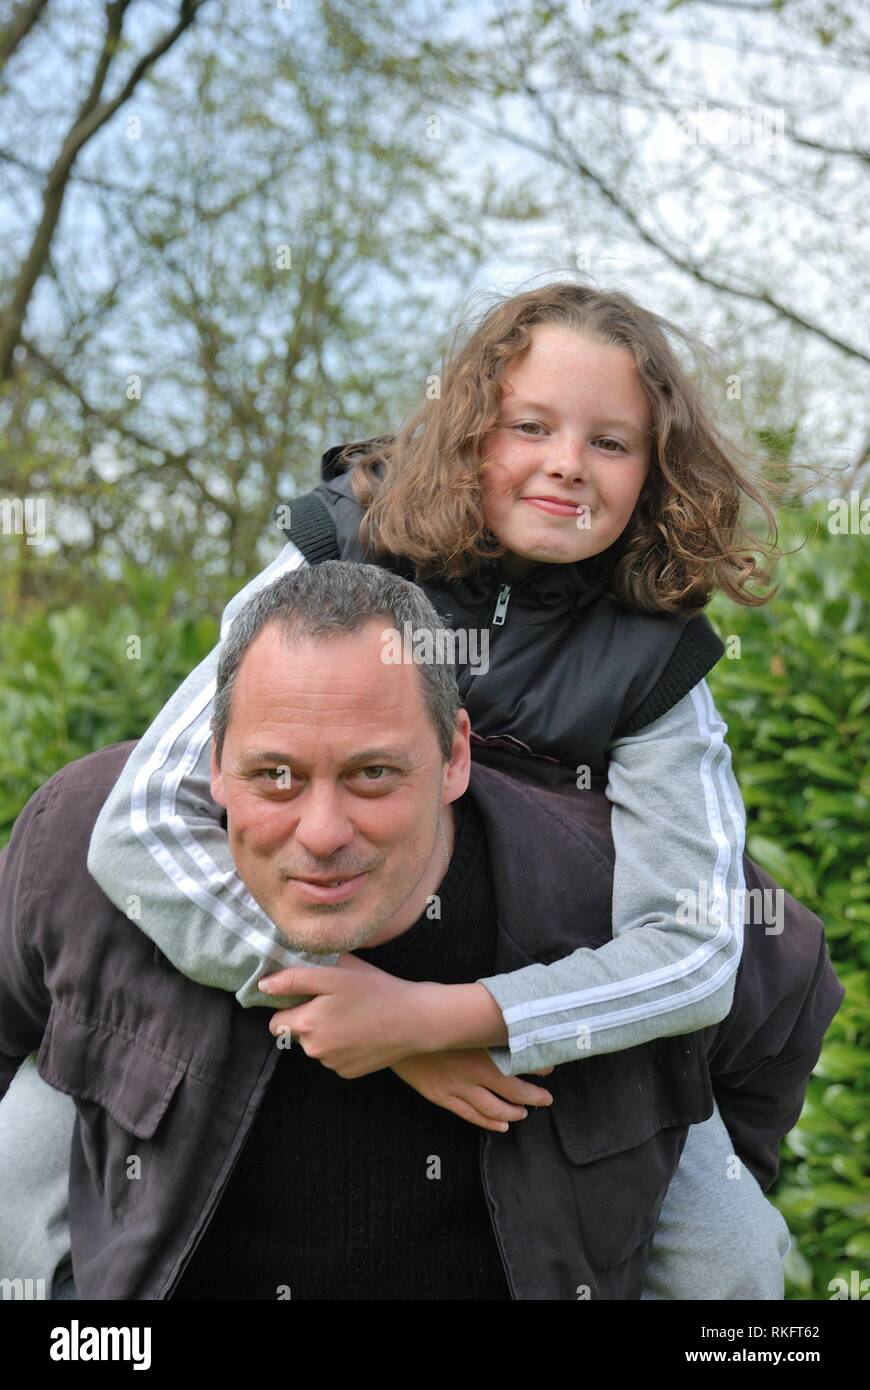 Complicity between father and daughter. Stock Photo